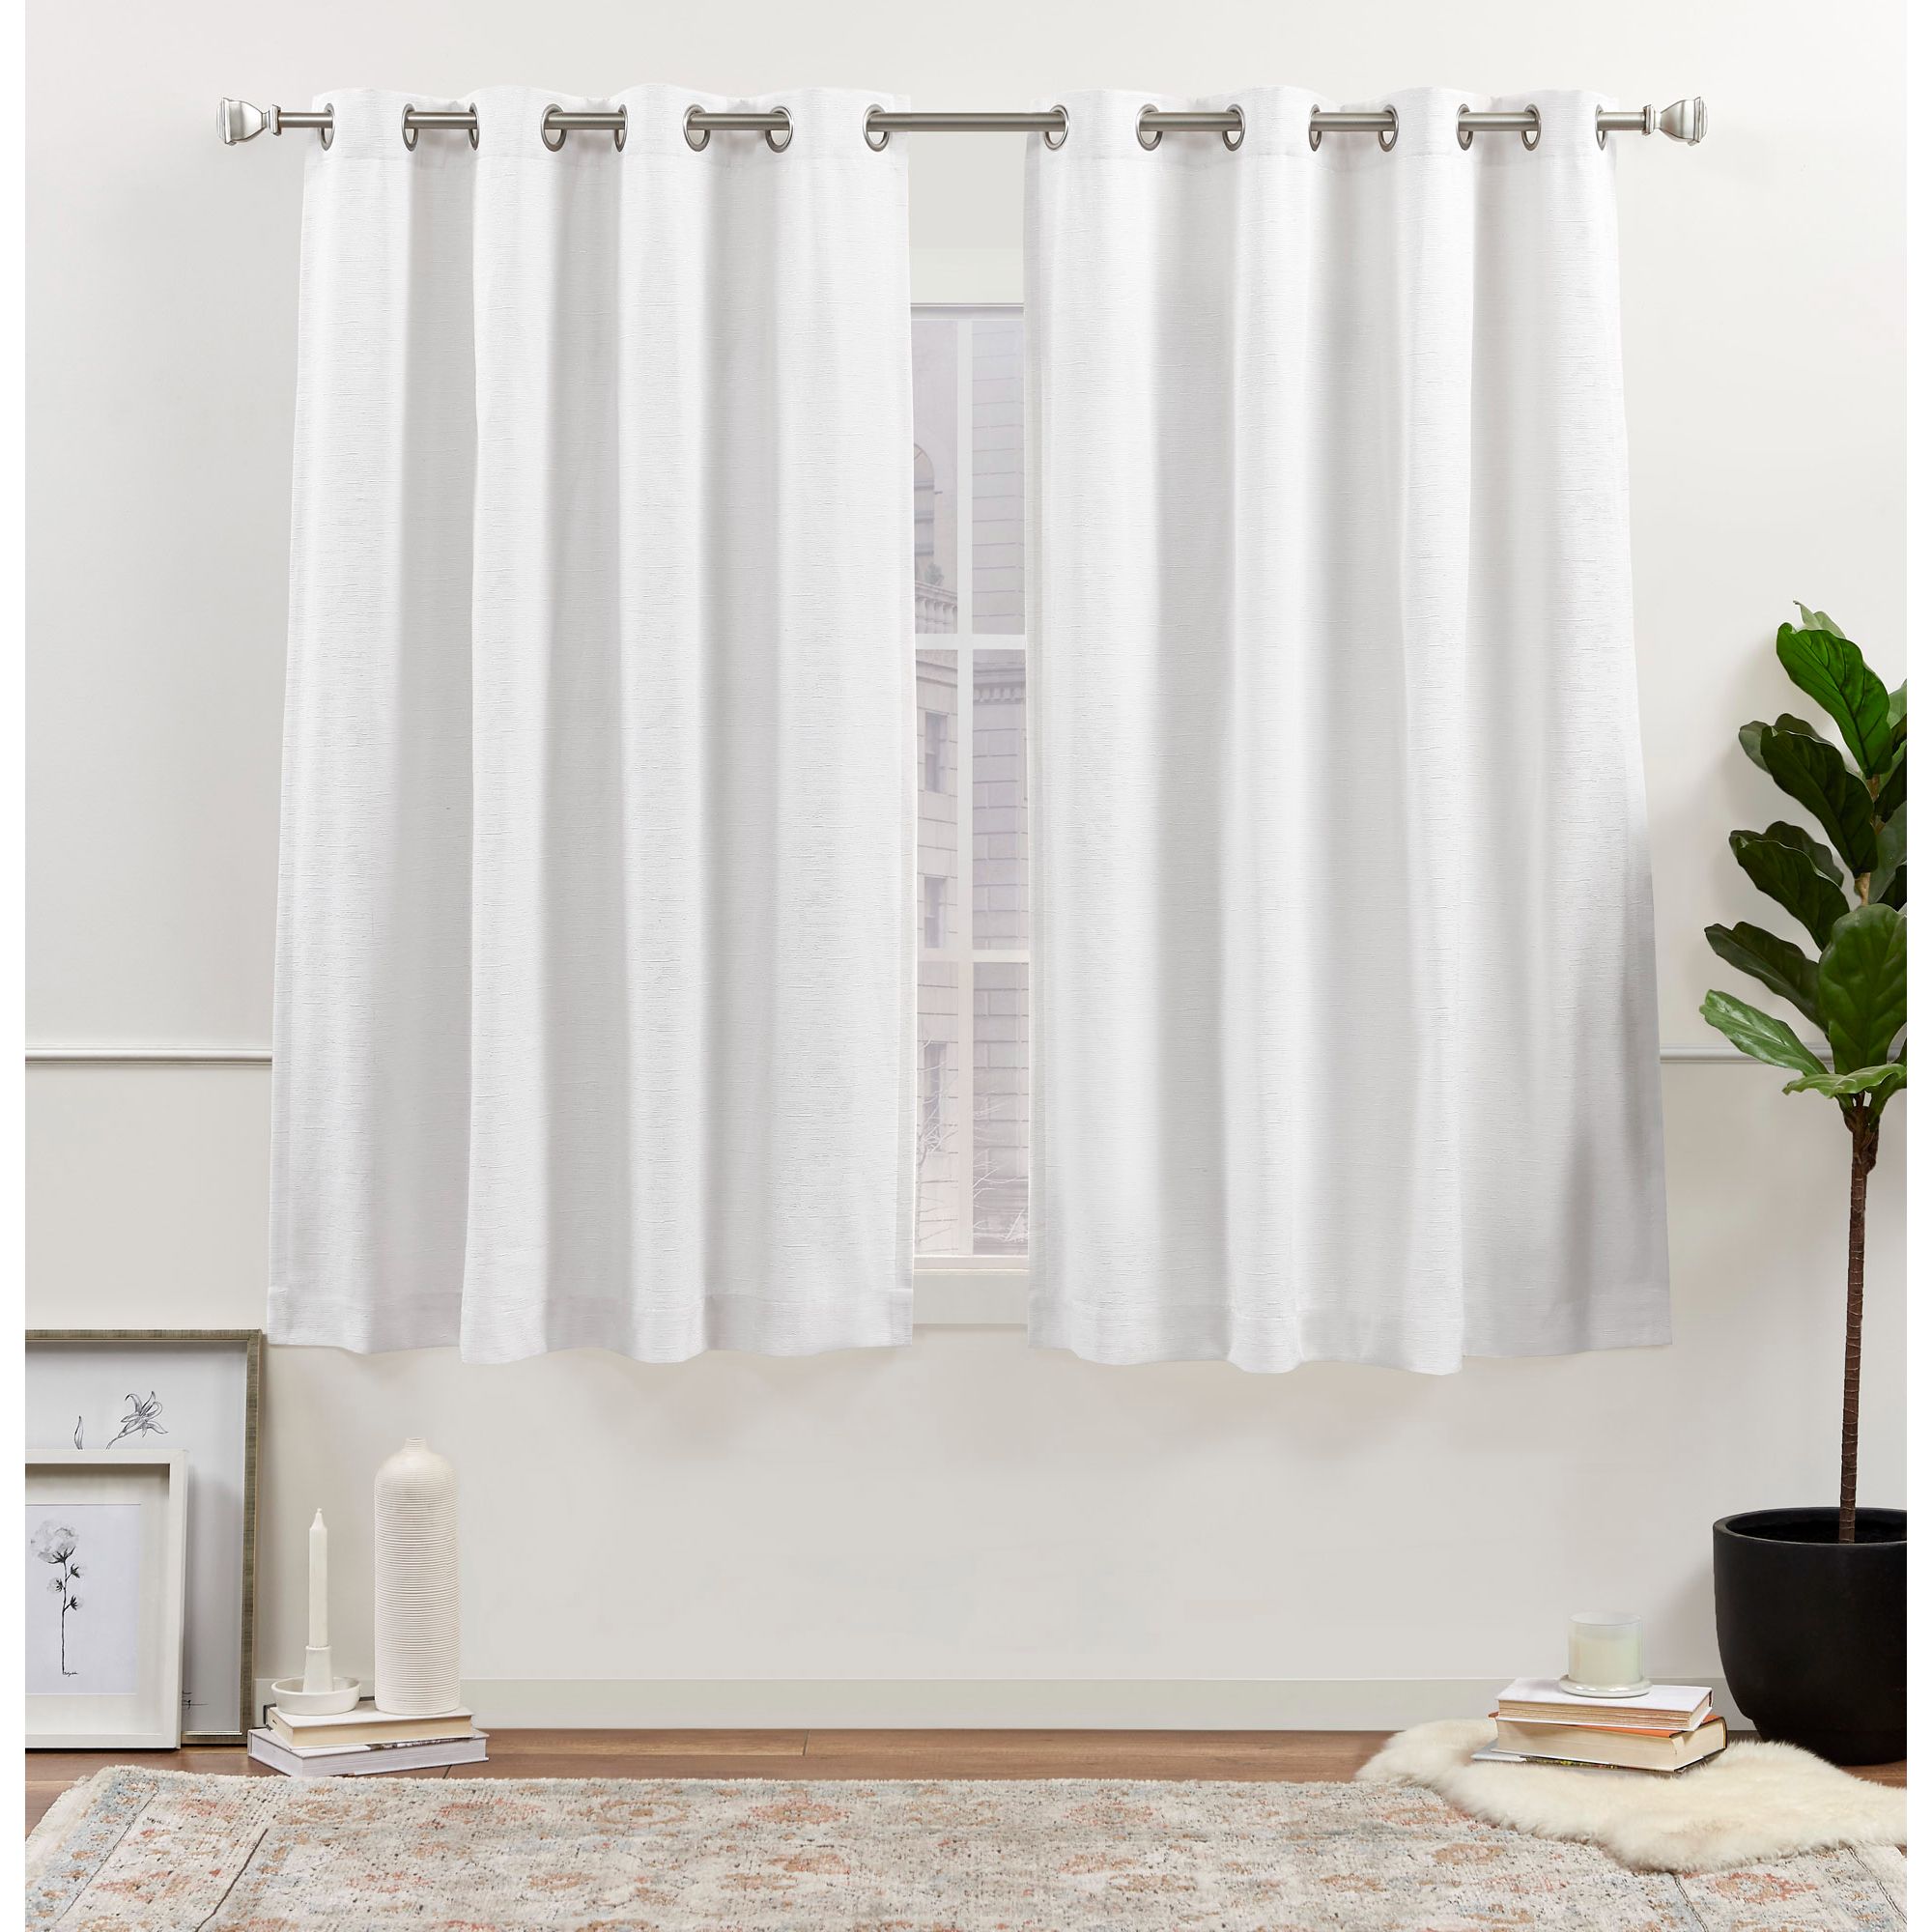 Nicole Miller Curtains & Drapes at Lowes.com